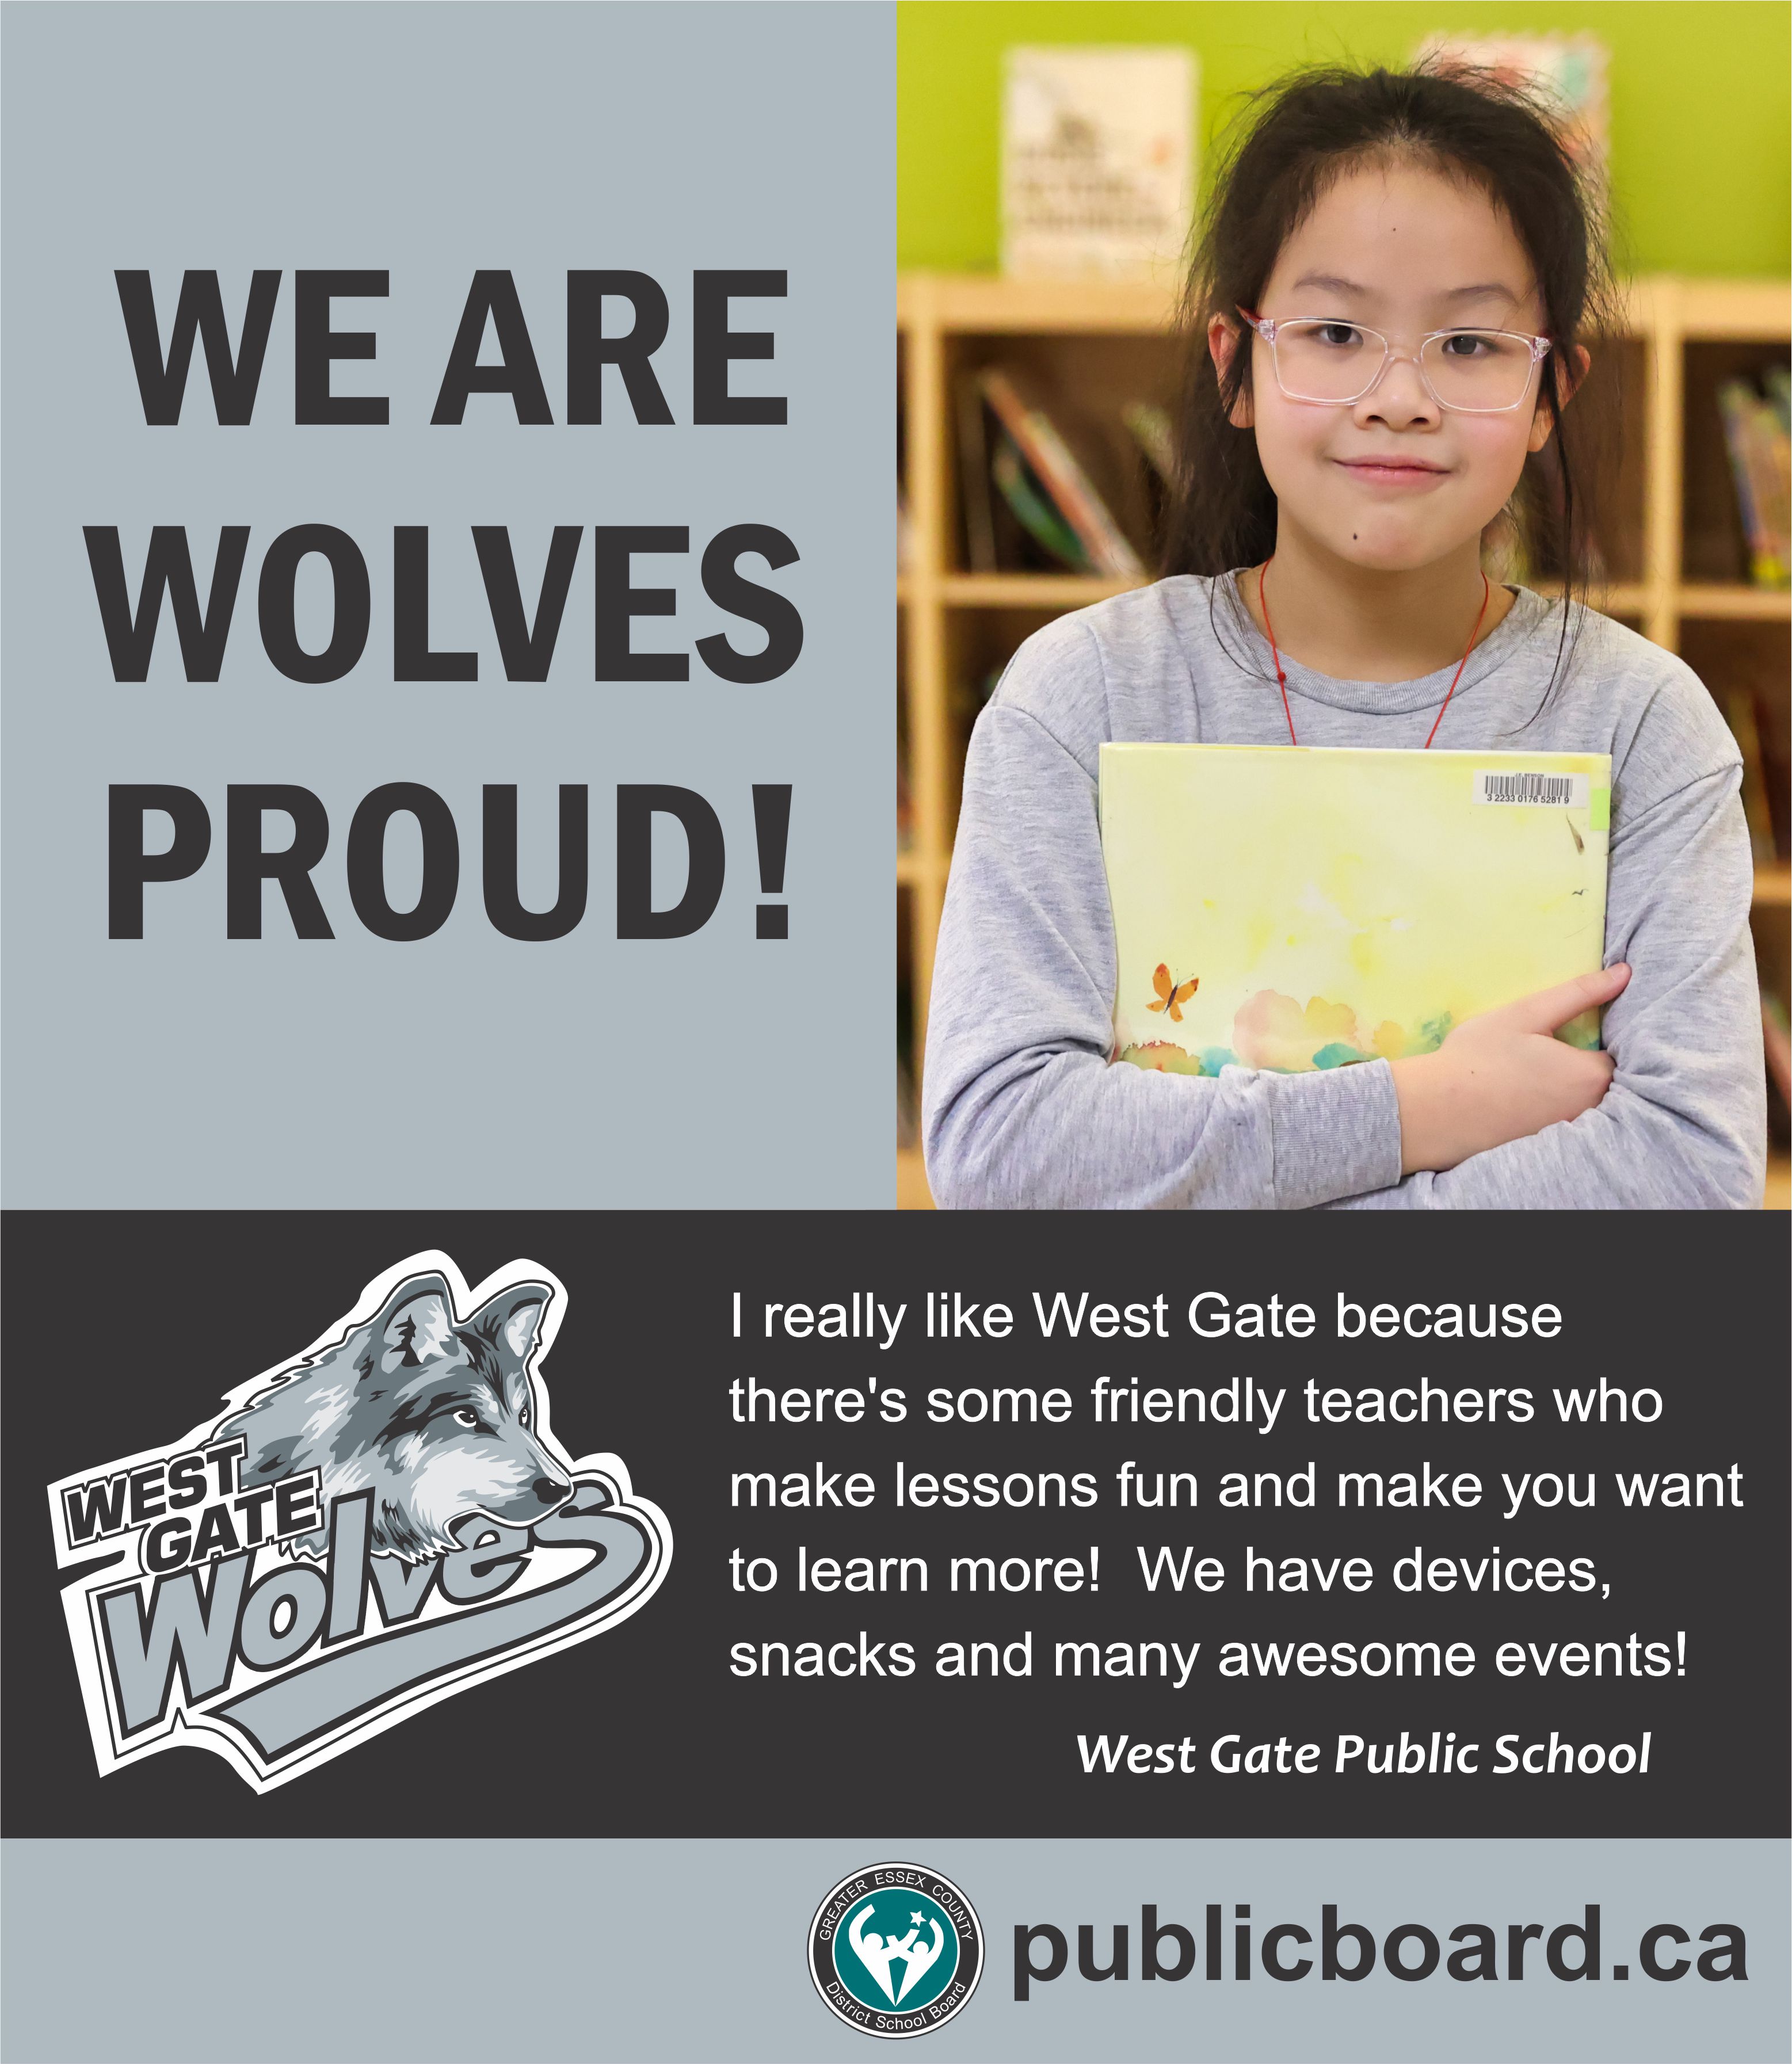 Young girl smiling and telling some great things about West Gate School